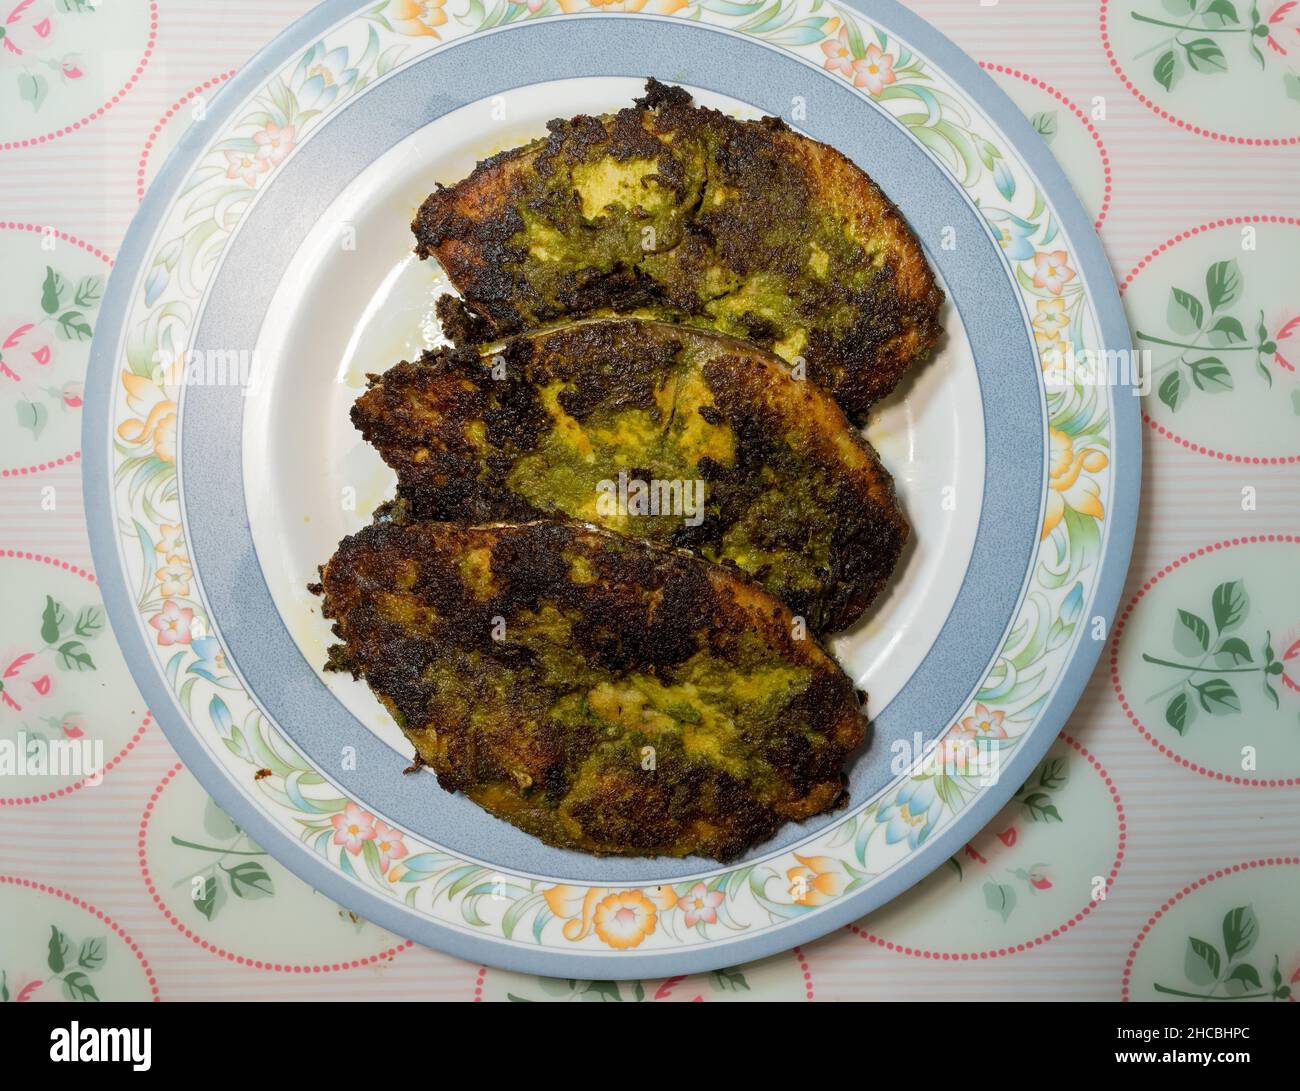 Homemade three slices of Kingfish fried to perfection in a green paste made of Corriander leaves, herbs and spices. Stock Photo